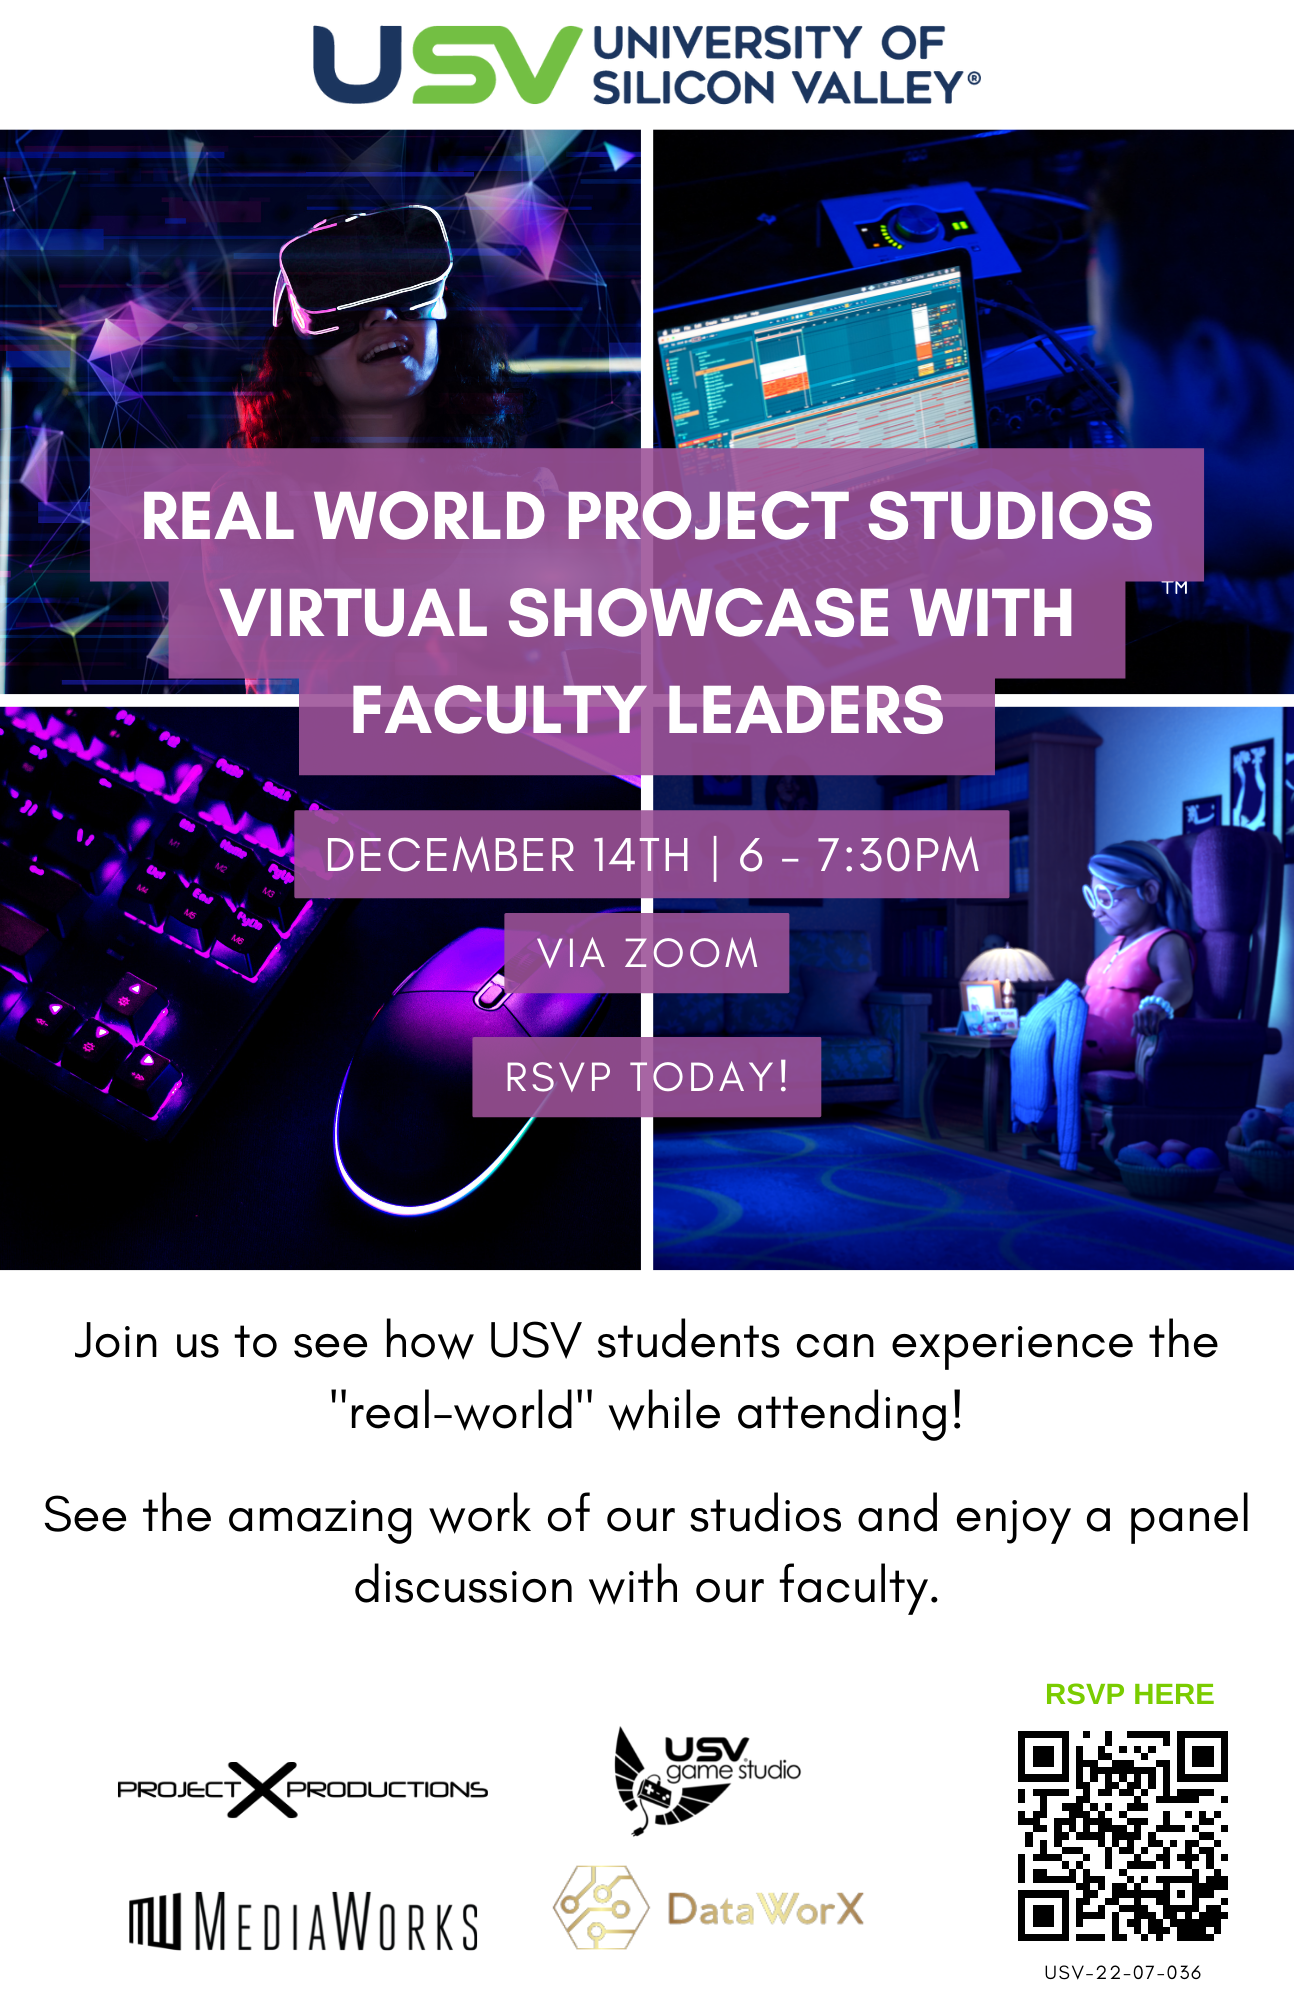 Real World Project Studios Showcase - Flyer (6)